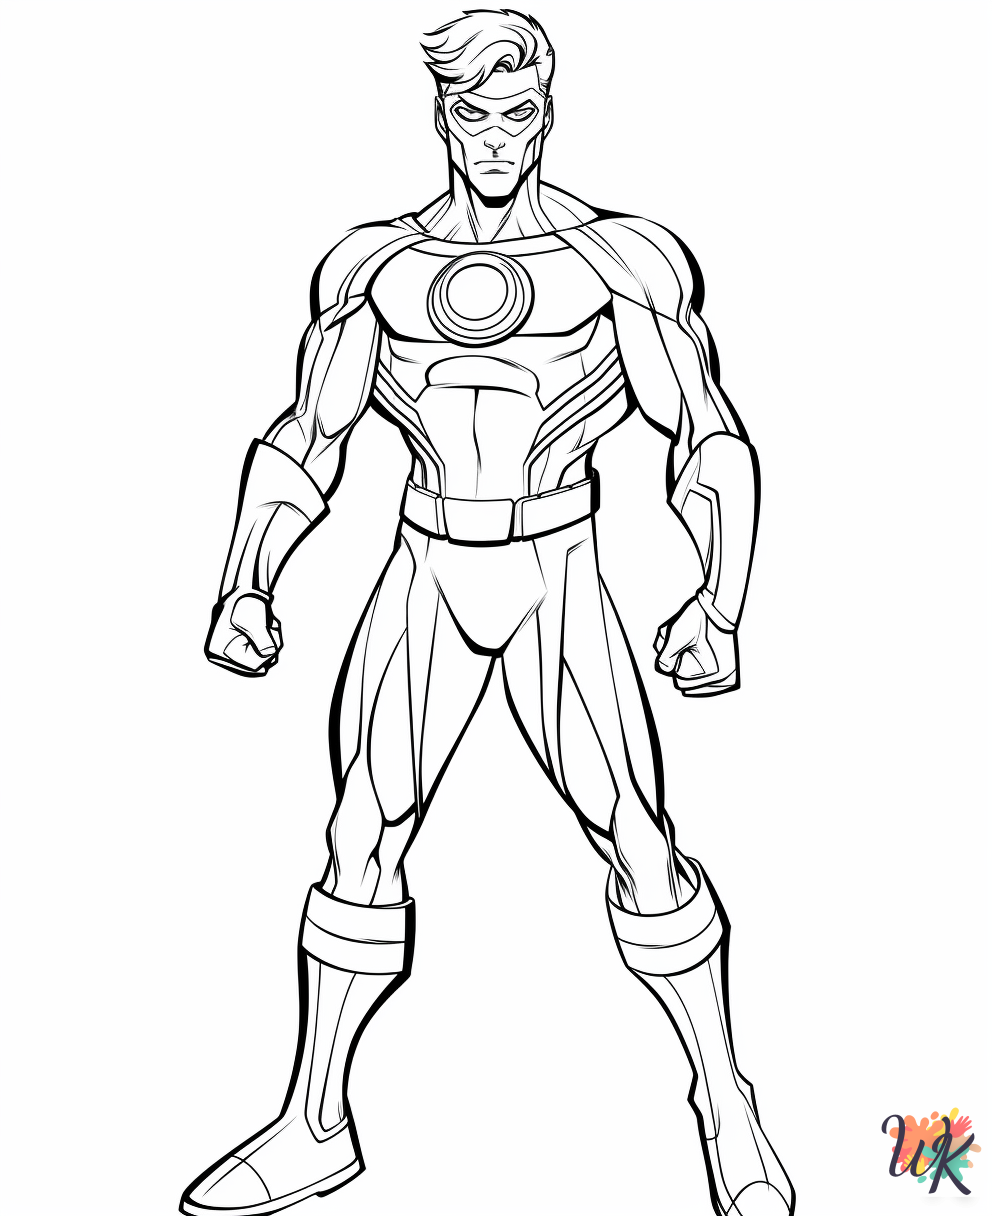 Green Lantern free coloring pages